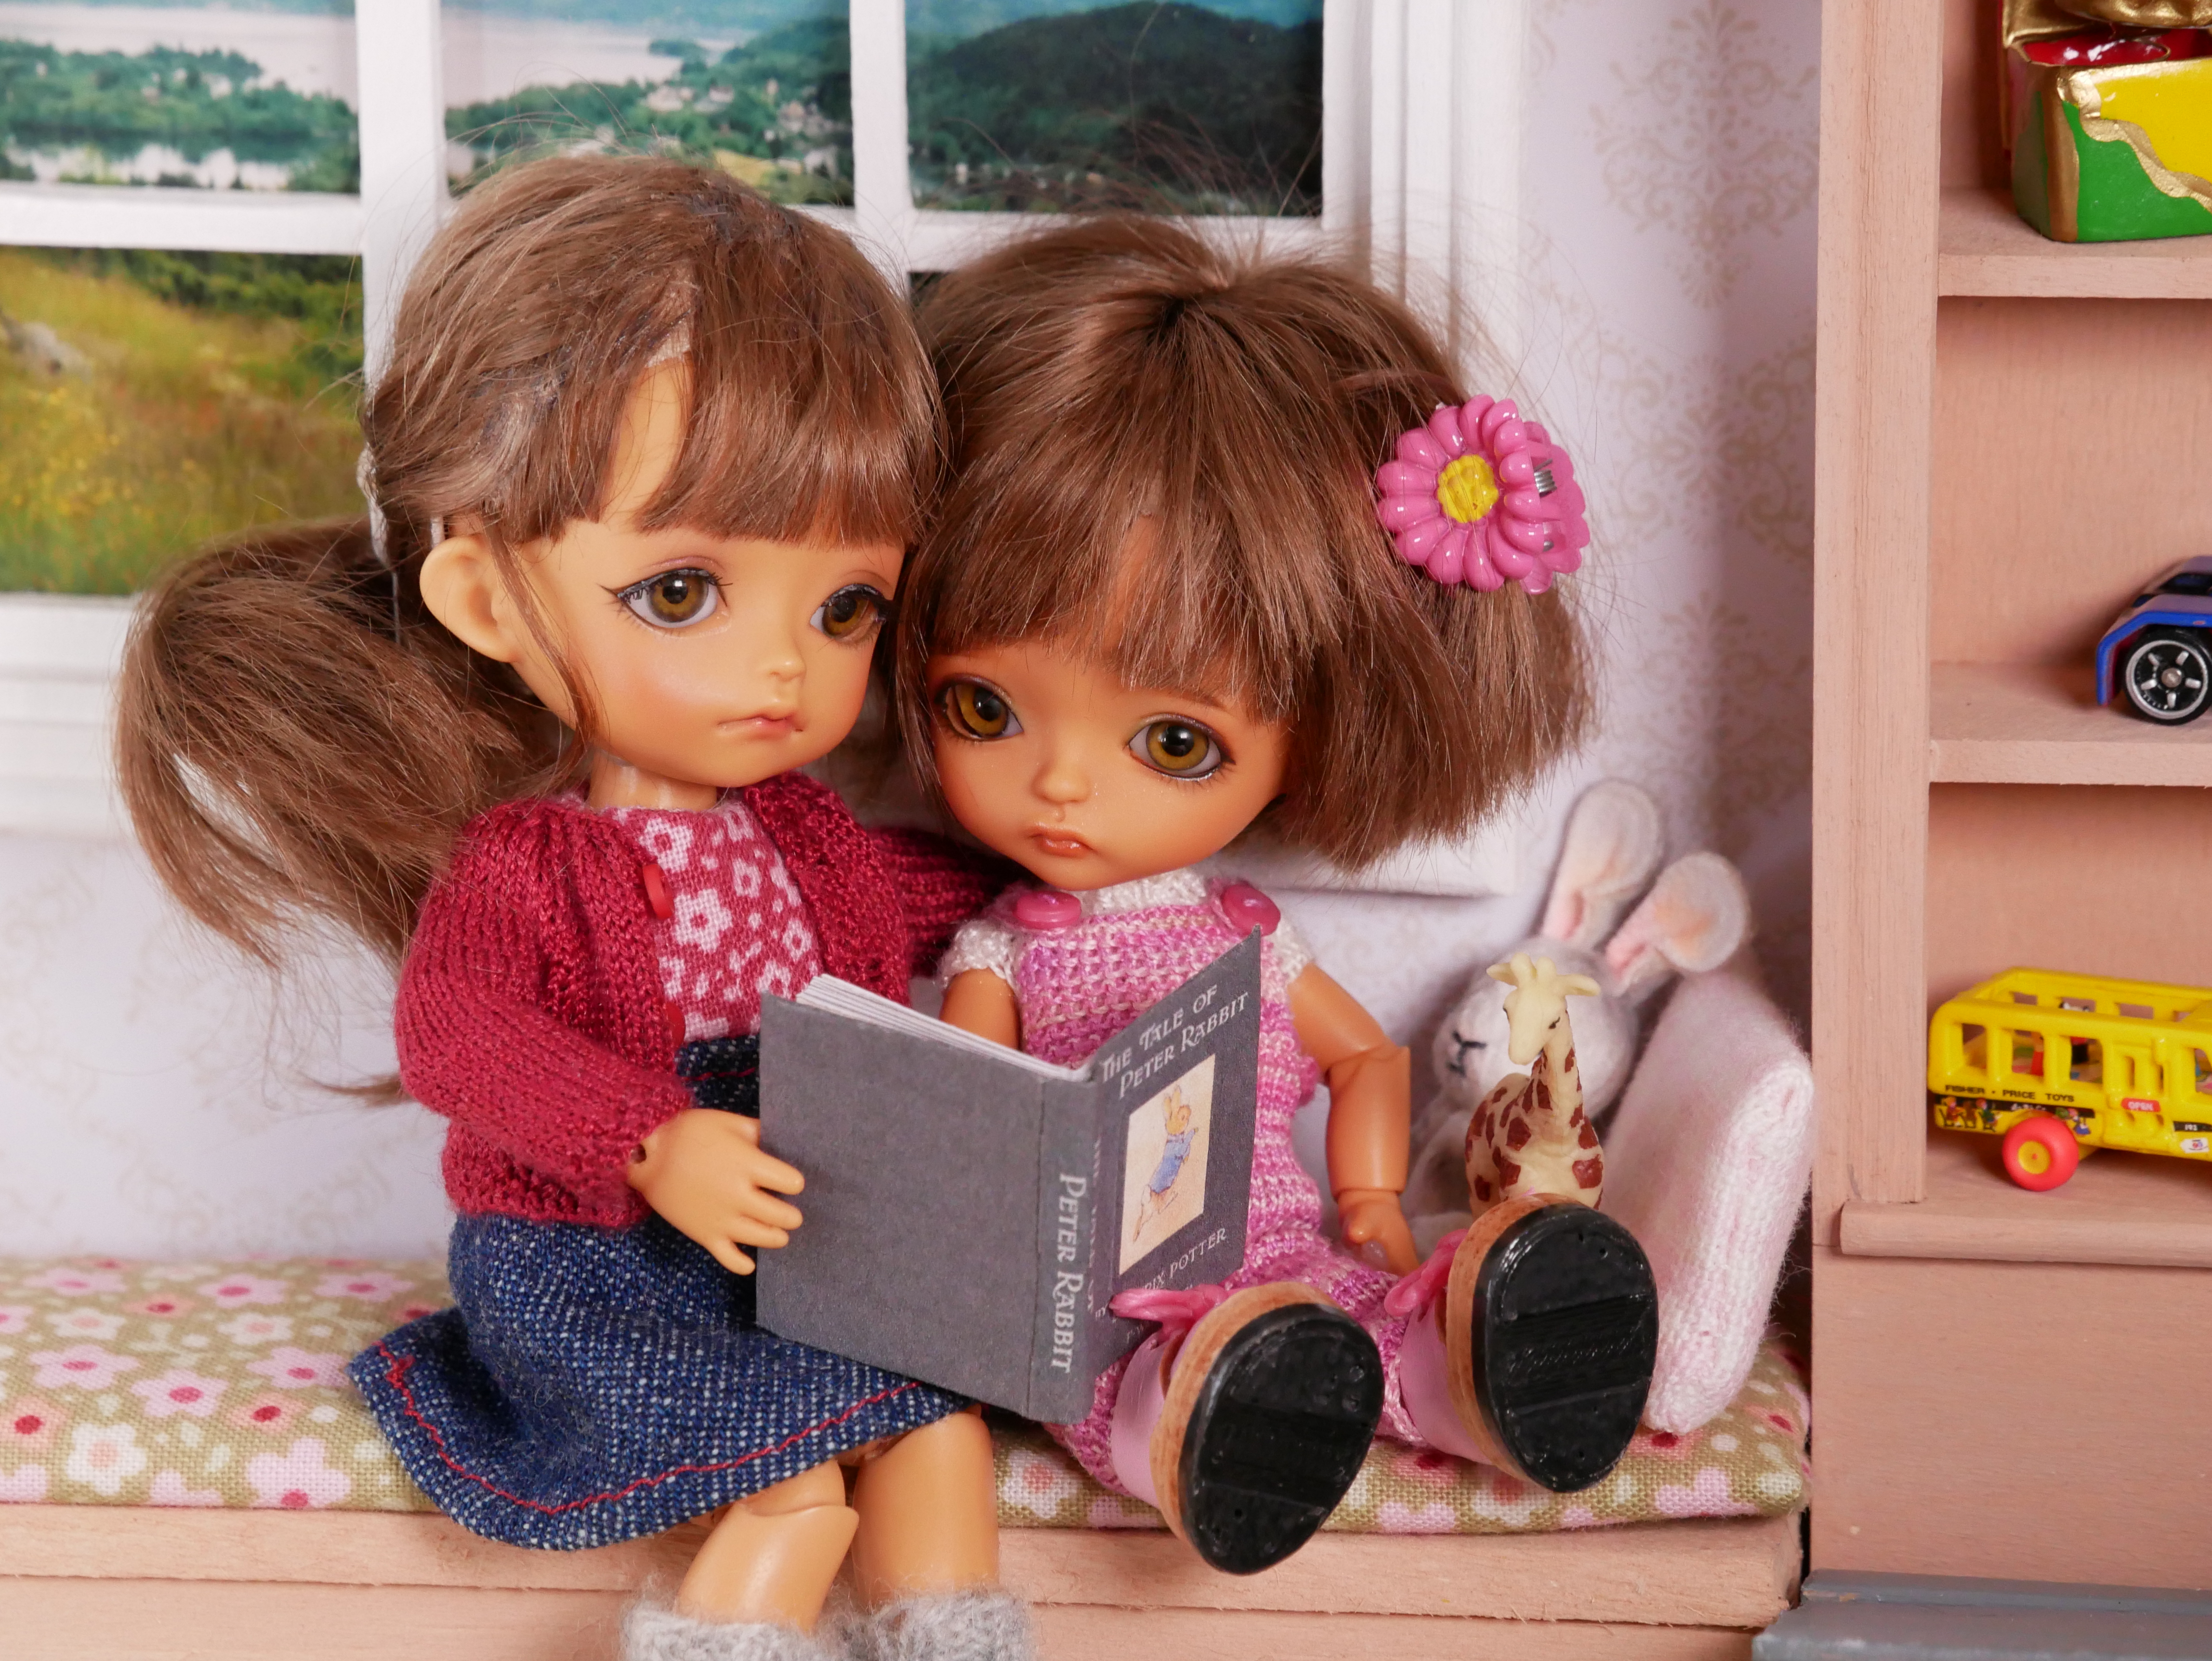 Annie reads to her sister Marie